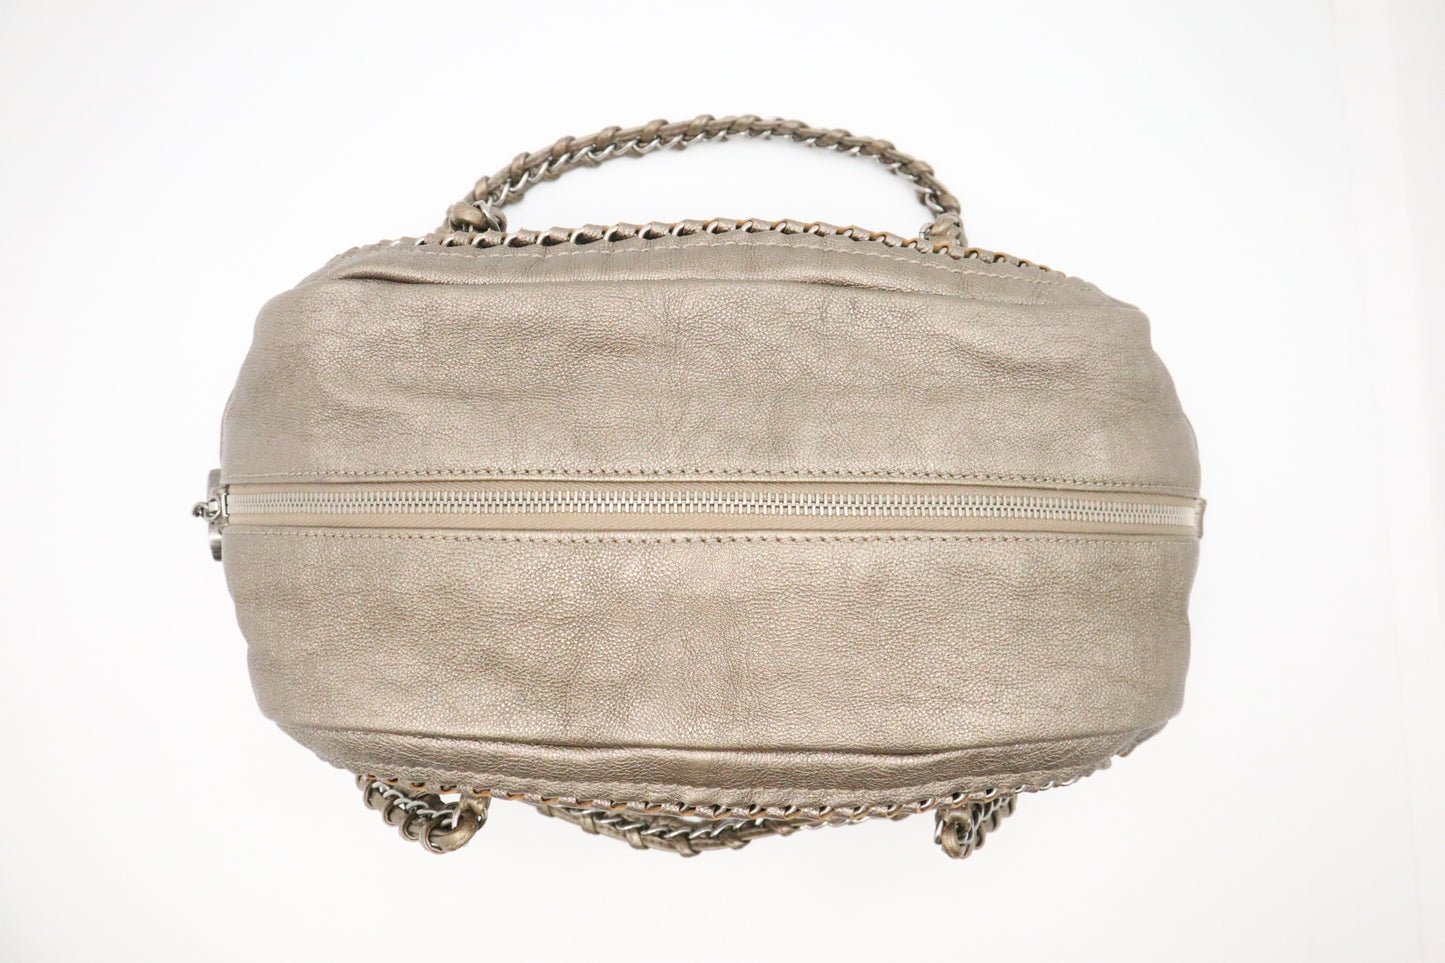 Chanel Ligne Luxe Bowler Bag in Pewter Leather